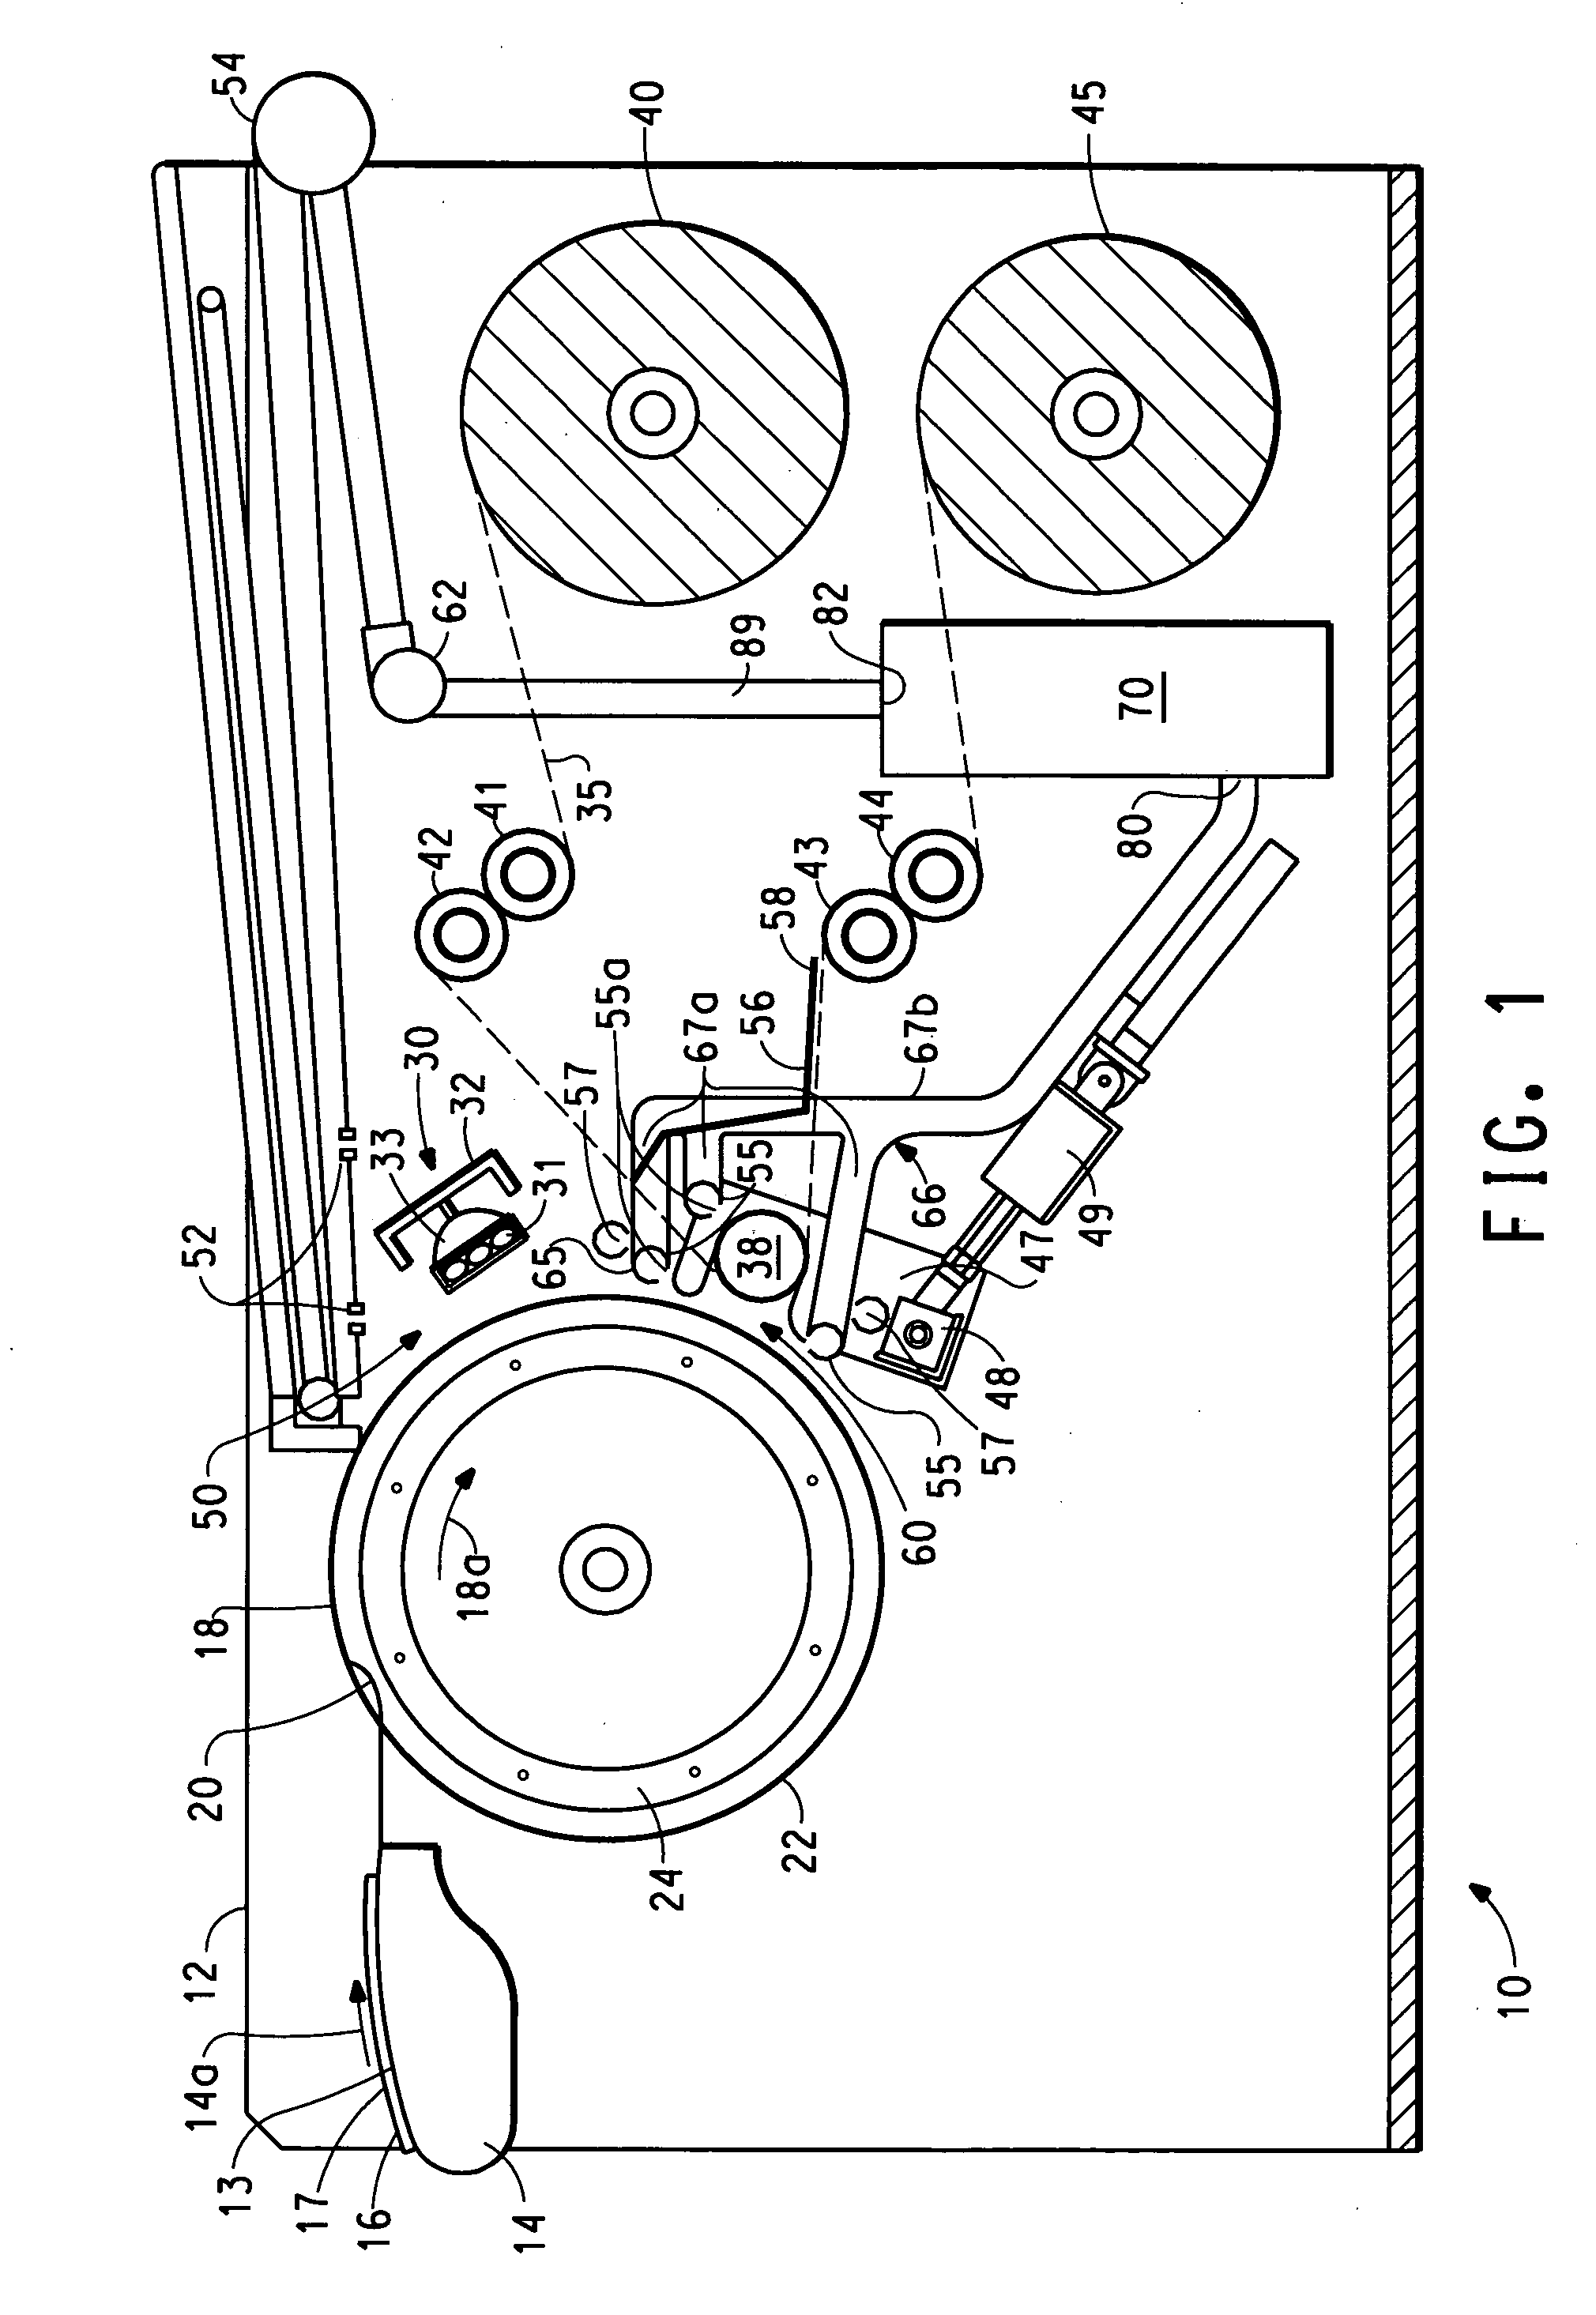 Method and apparatus for thermal development